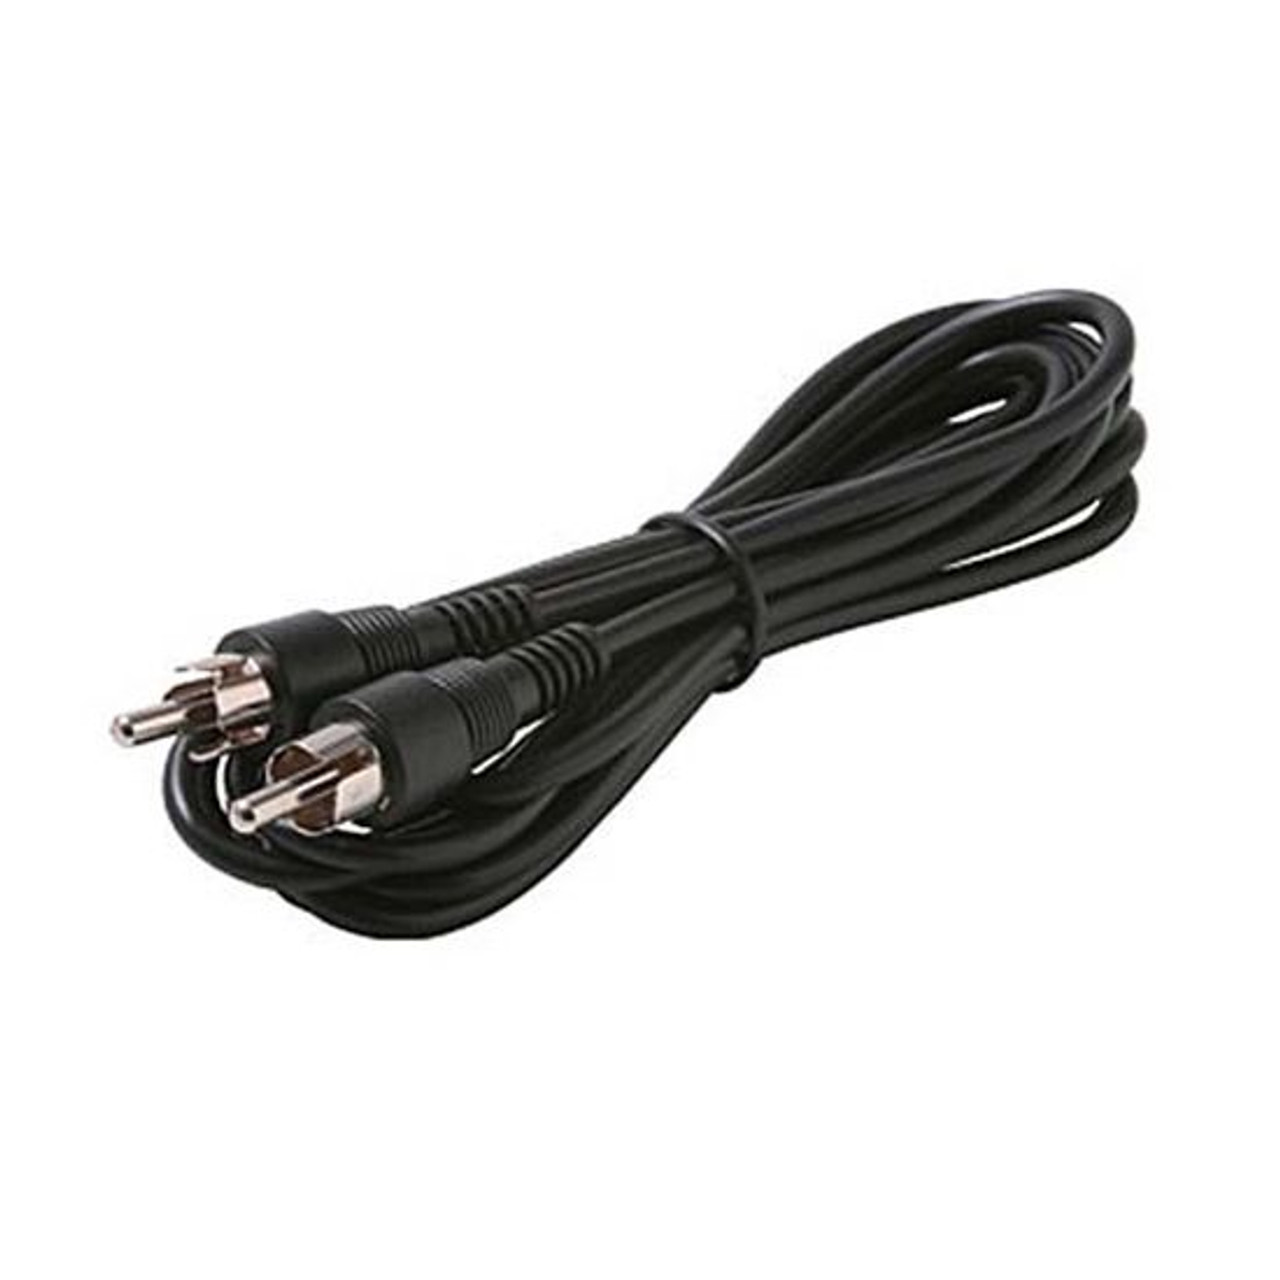 Eagle 6' FT RCA Cable Male Plug Each End Mono Black Shielded Audio Copper Center Low Loss Coax Cable with Moulded Push-On Plug Nickel Plated Connectors for Audio Video Component Signal Connects VCR and Stereo Receivers